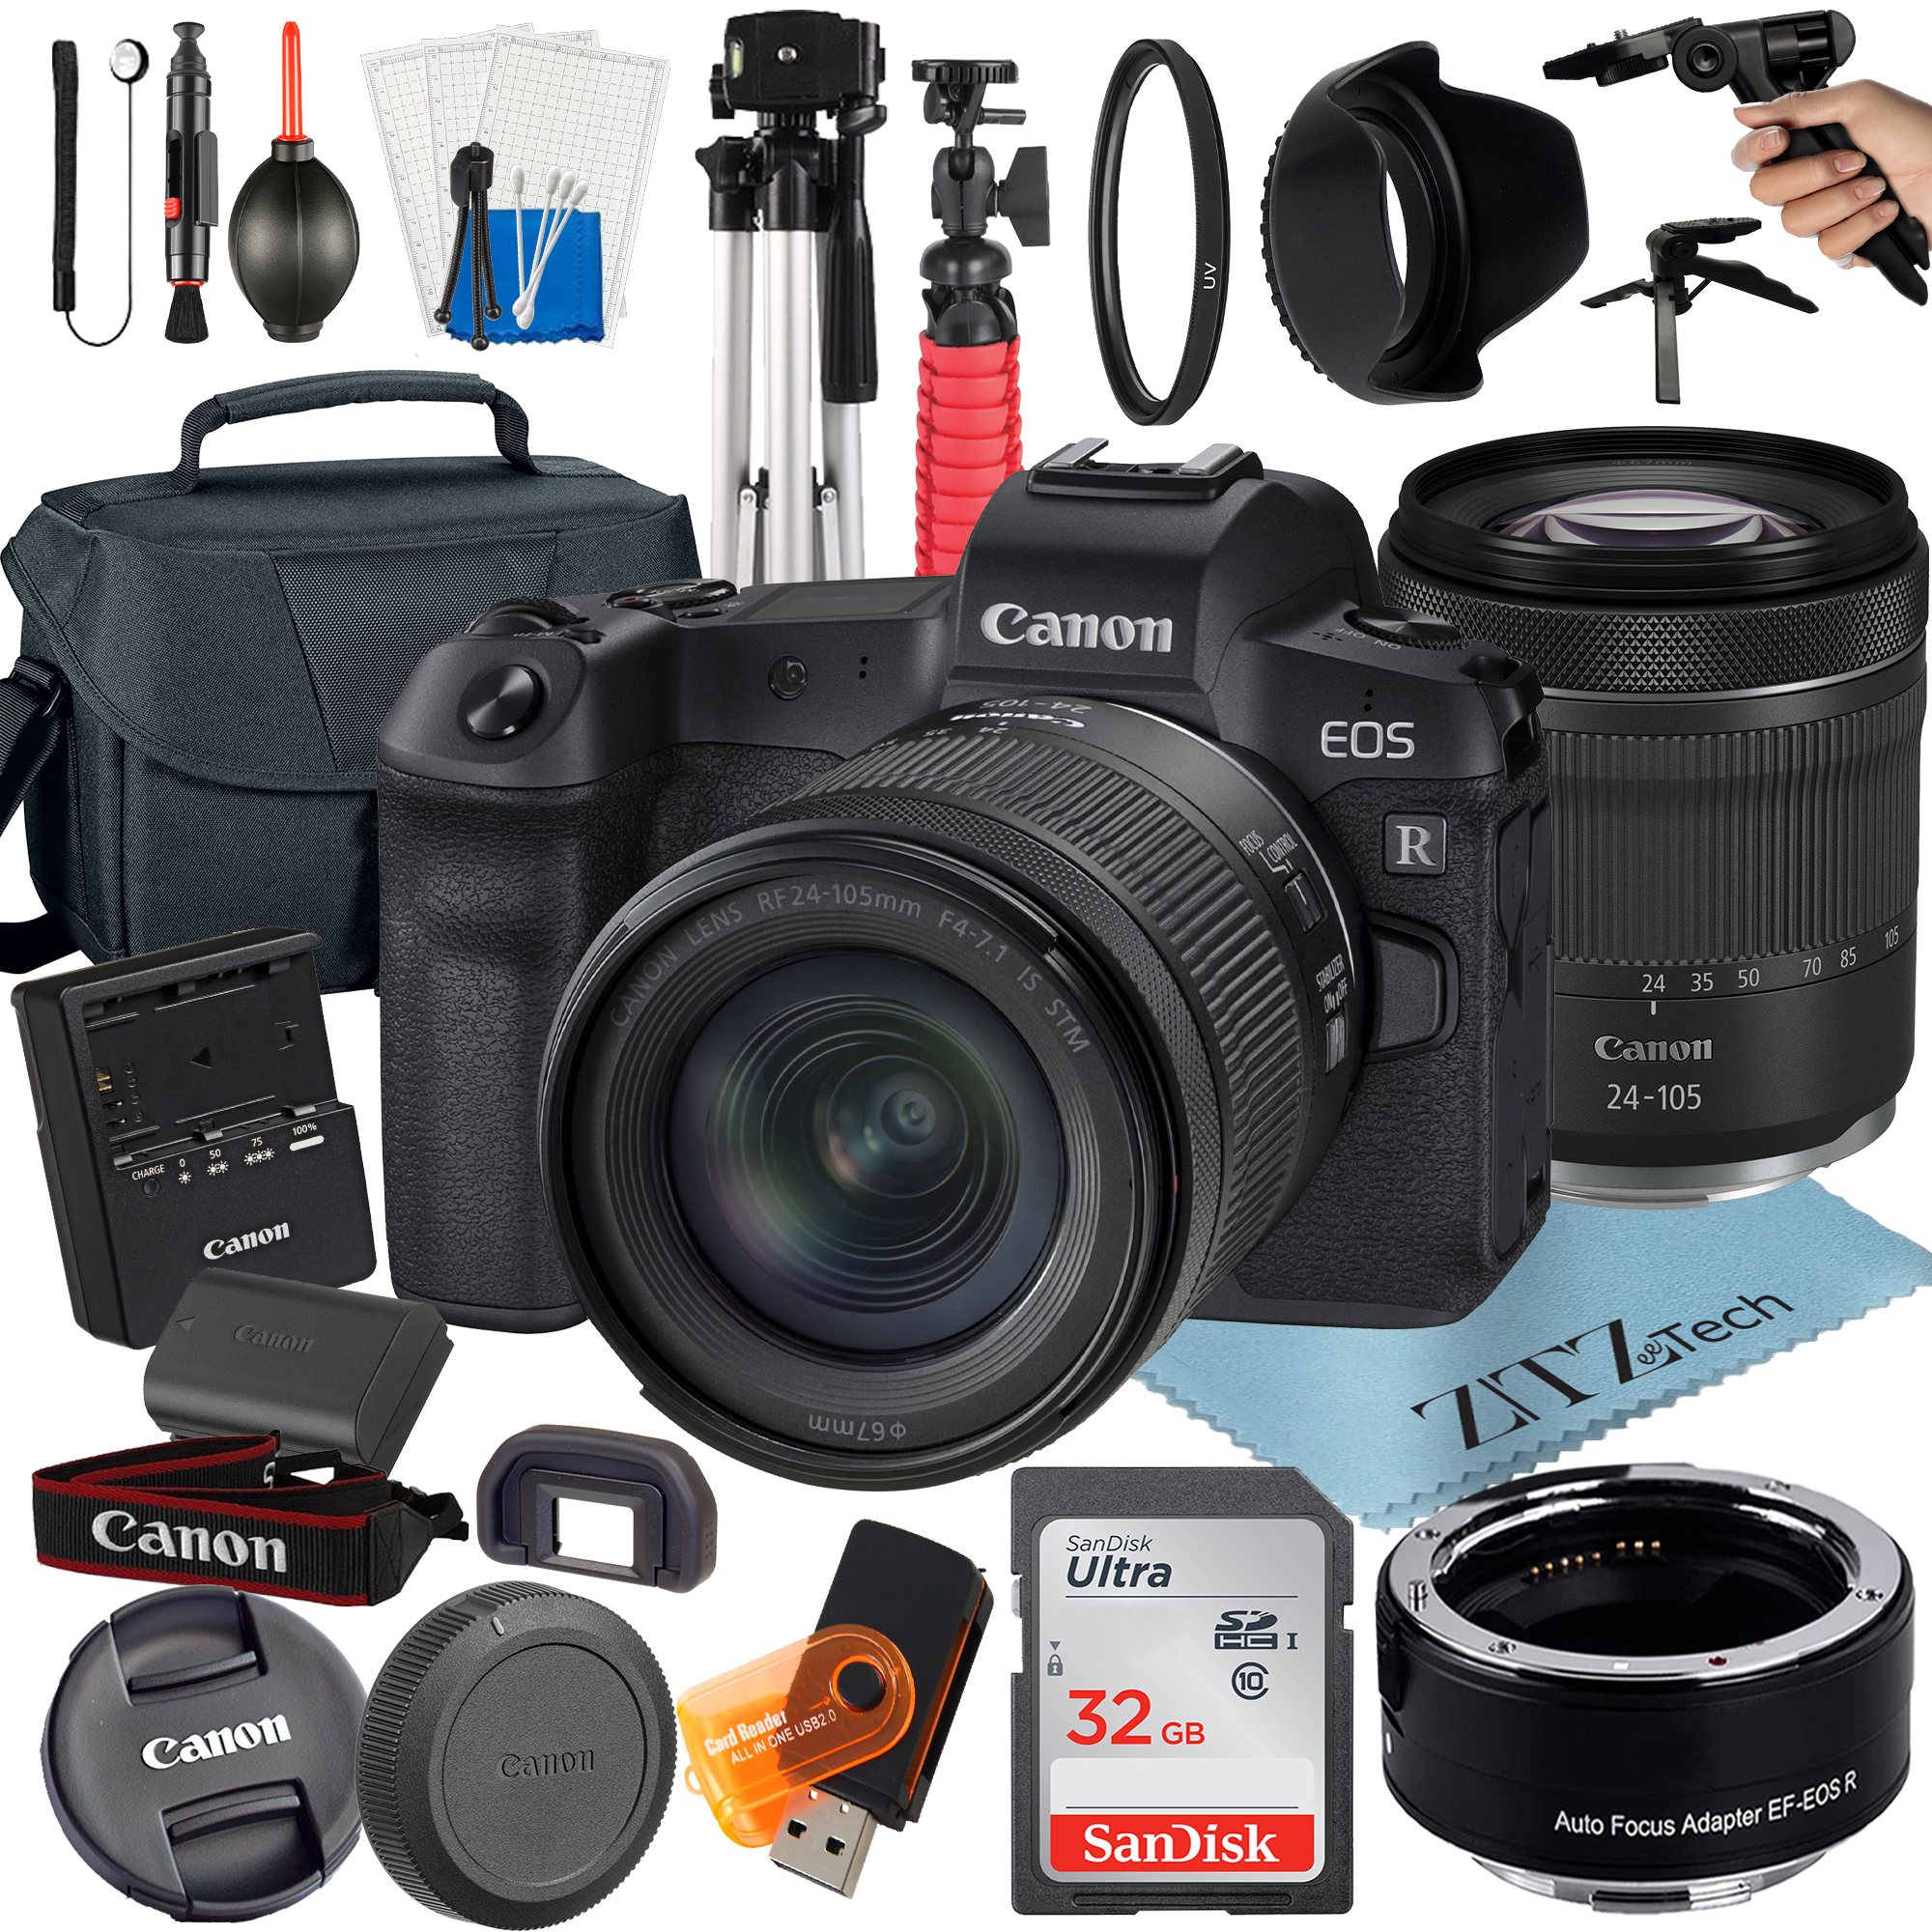 Canon EOS R Mirrorless Digital Camera with RF 24-105mm STM Lens + Mount Adapter + 32GB SanDisk + ZeeTech Accessory